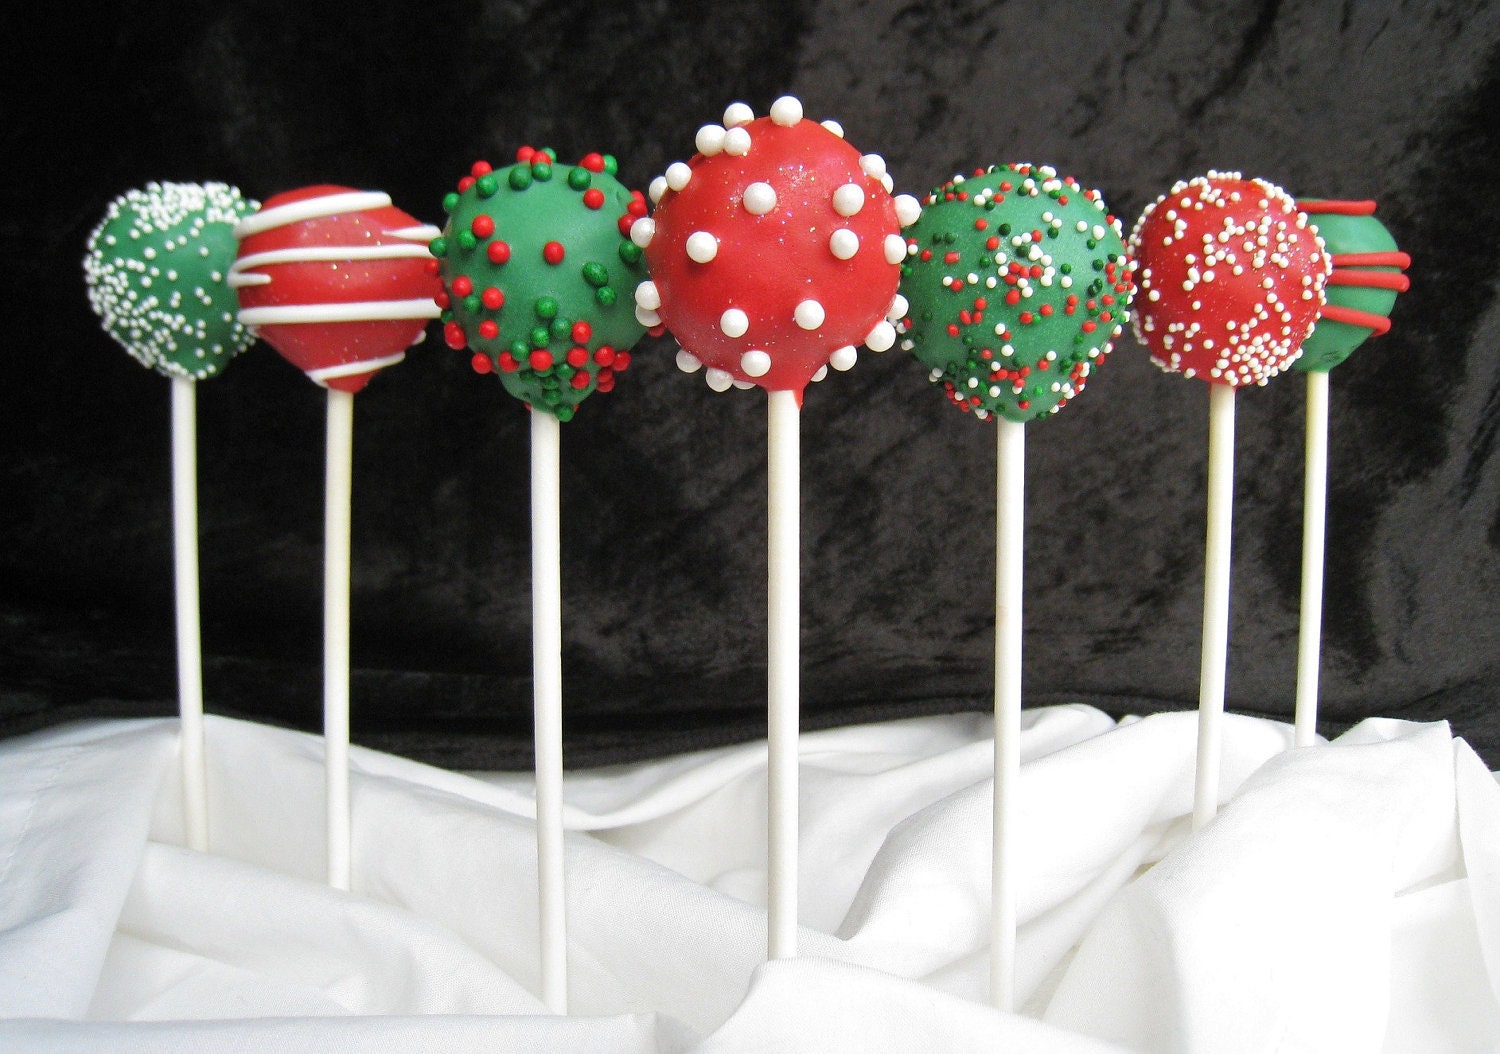 Cake Pops: Christmas Cake Pops Made with High Quality Ingredients.